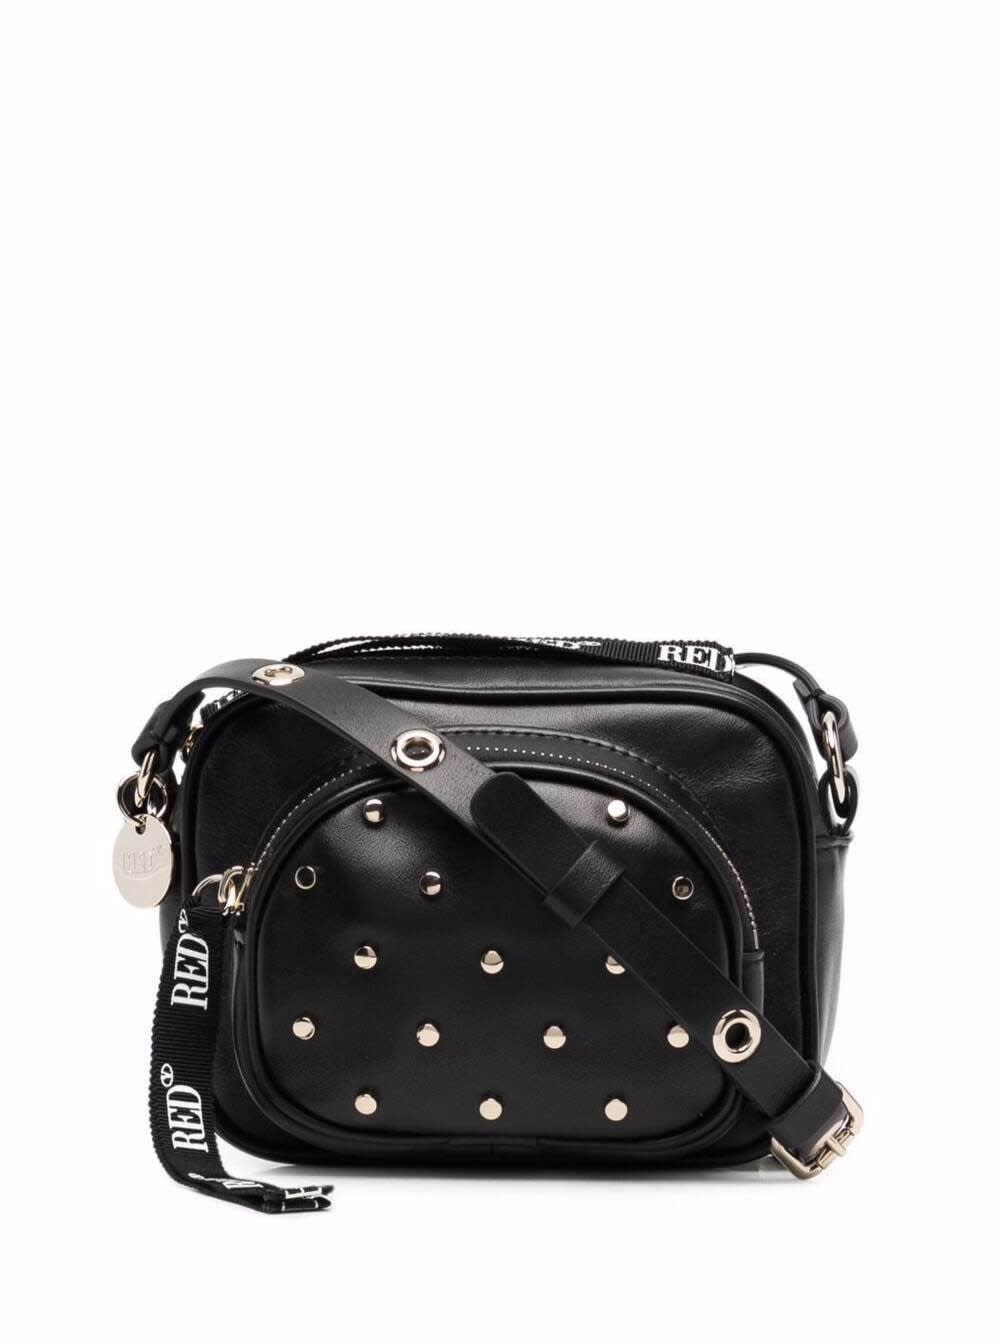 RED Valentino Crossbody Bag In Black Leather With Studs